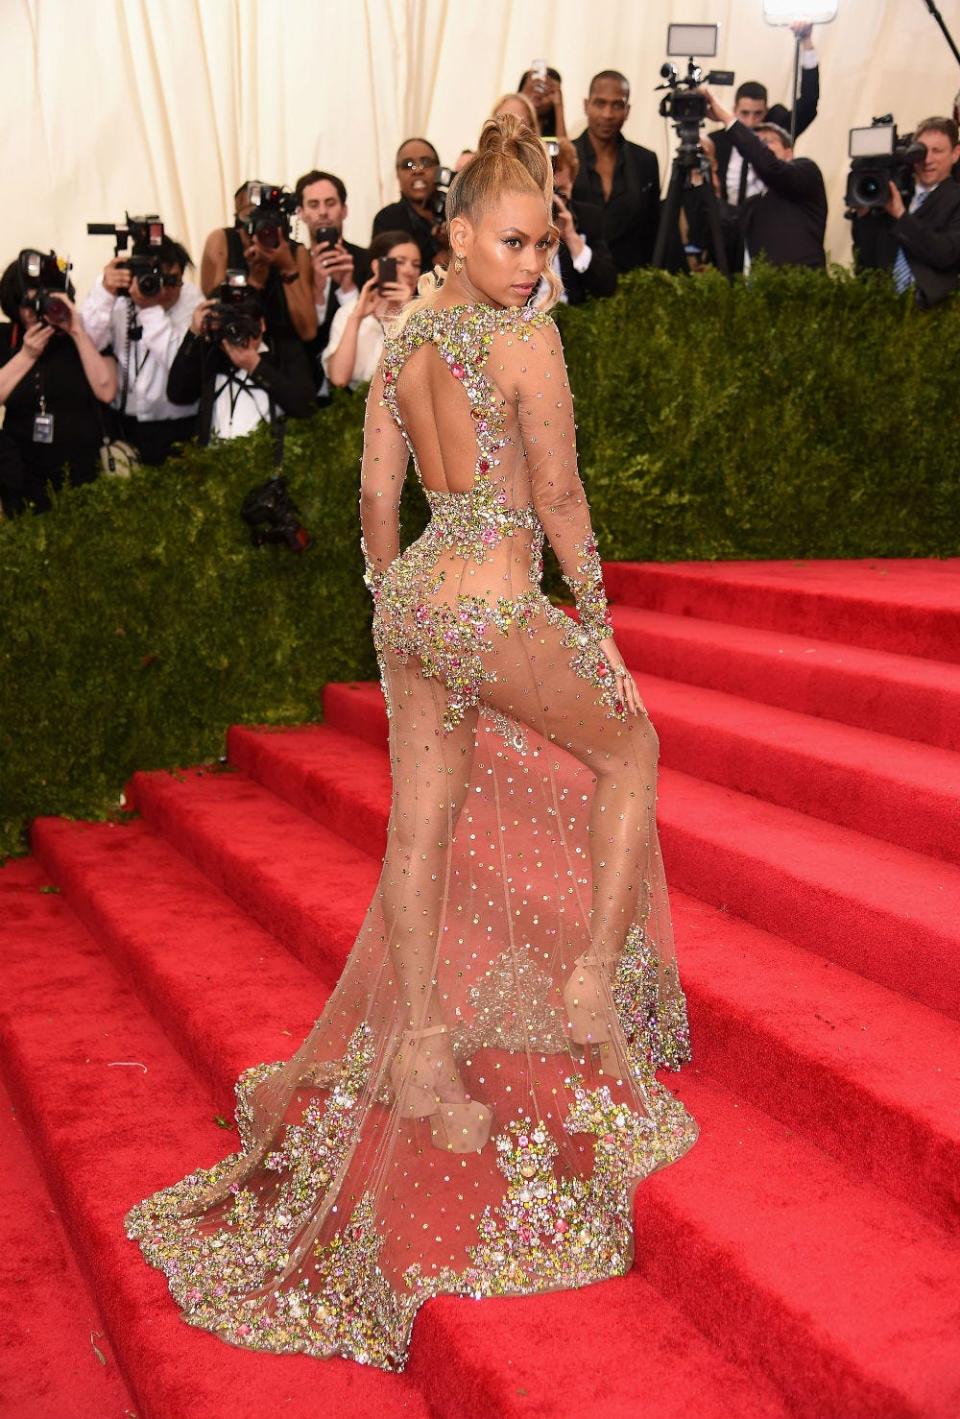 Beyonce poses while walking up the steps of the red carpet at the Met Gala, wearing a sheer dress with colorful jewels on the back and hem.